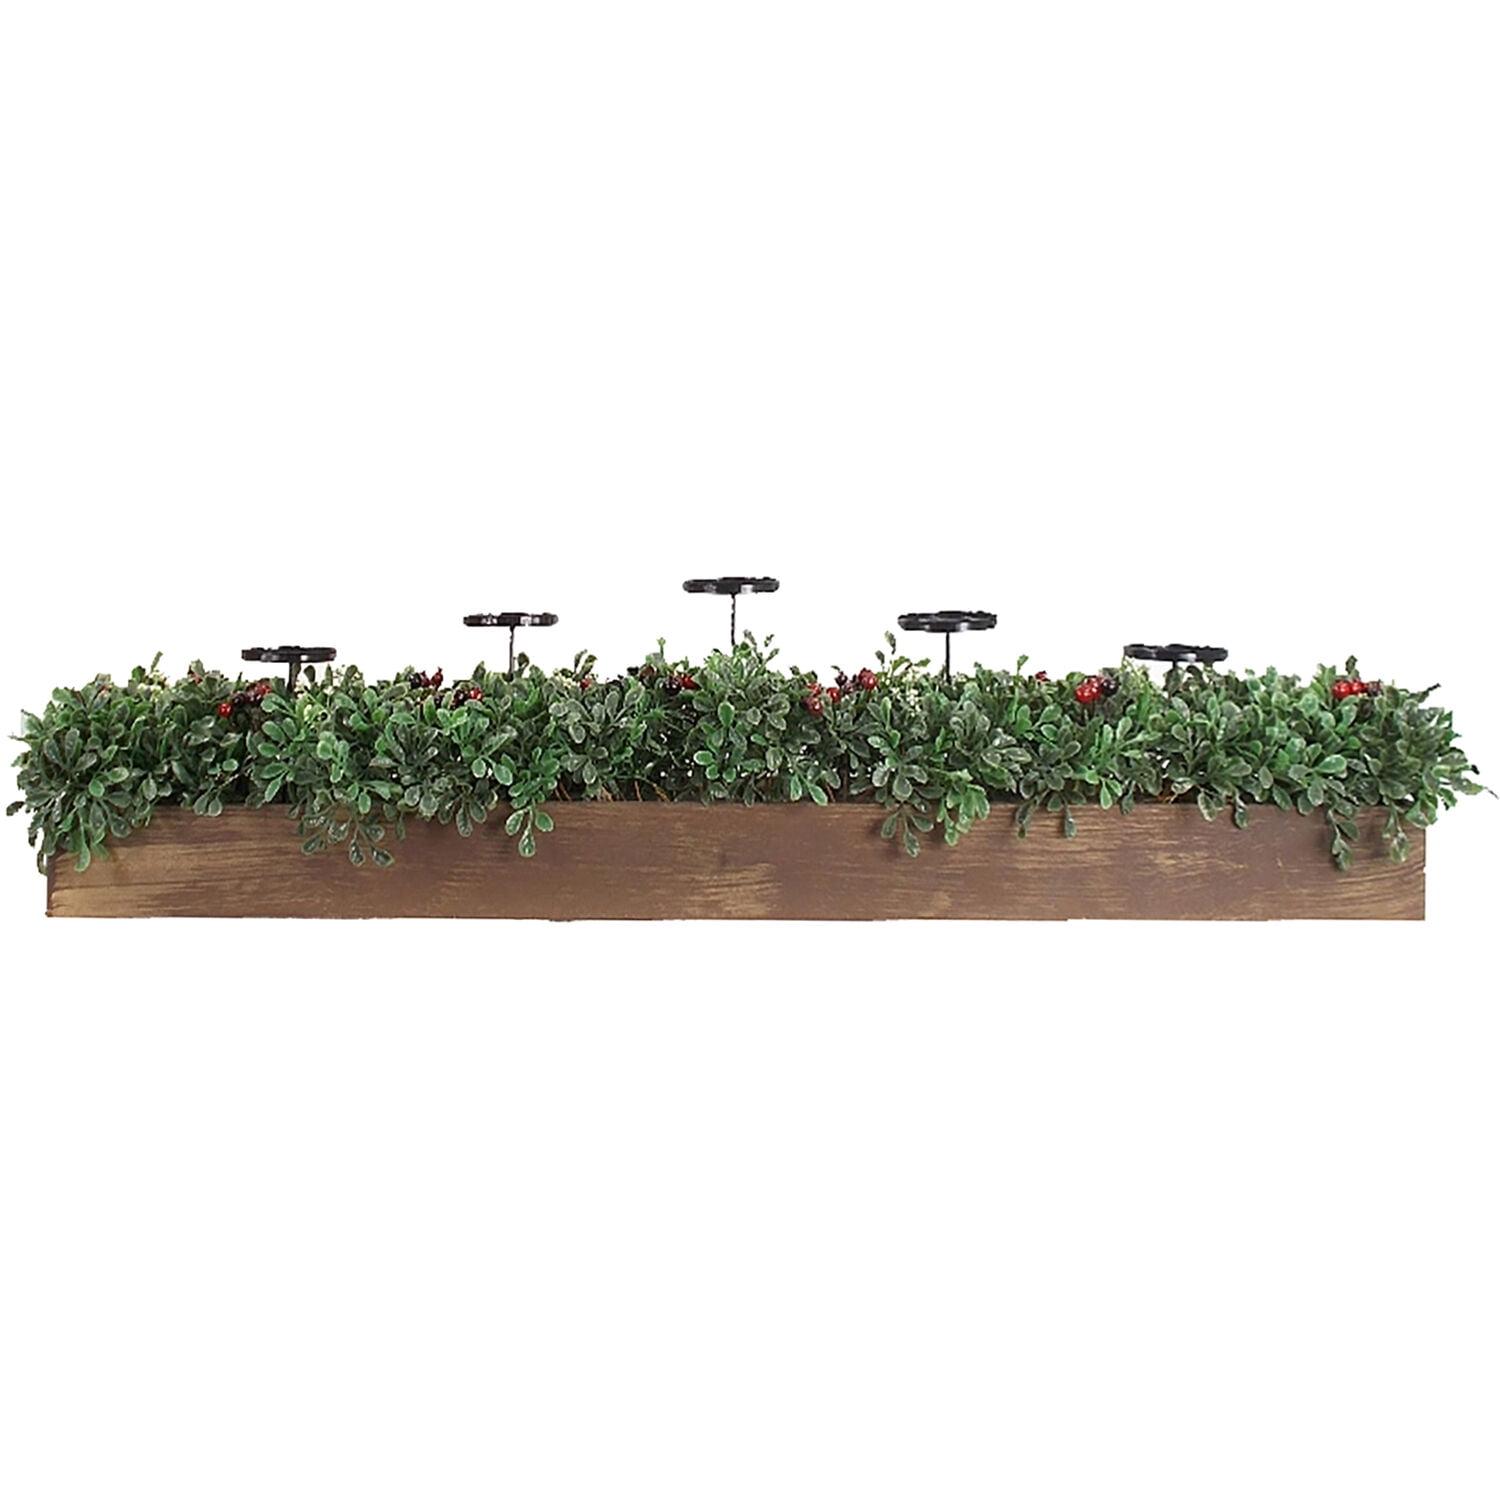 Rustic 42" Winter Candle Holder Centerpiece with Boxwood and Berries